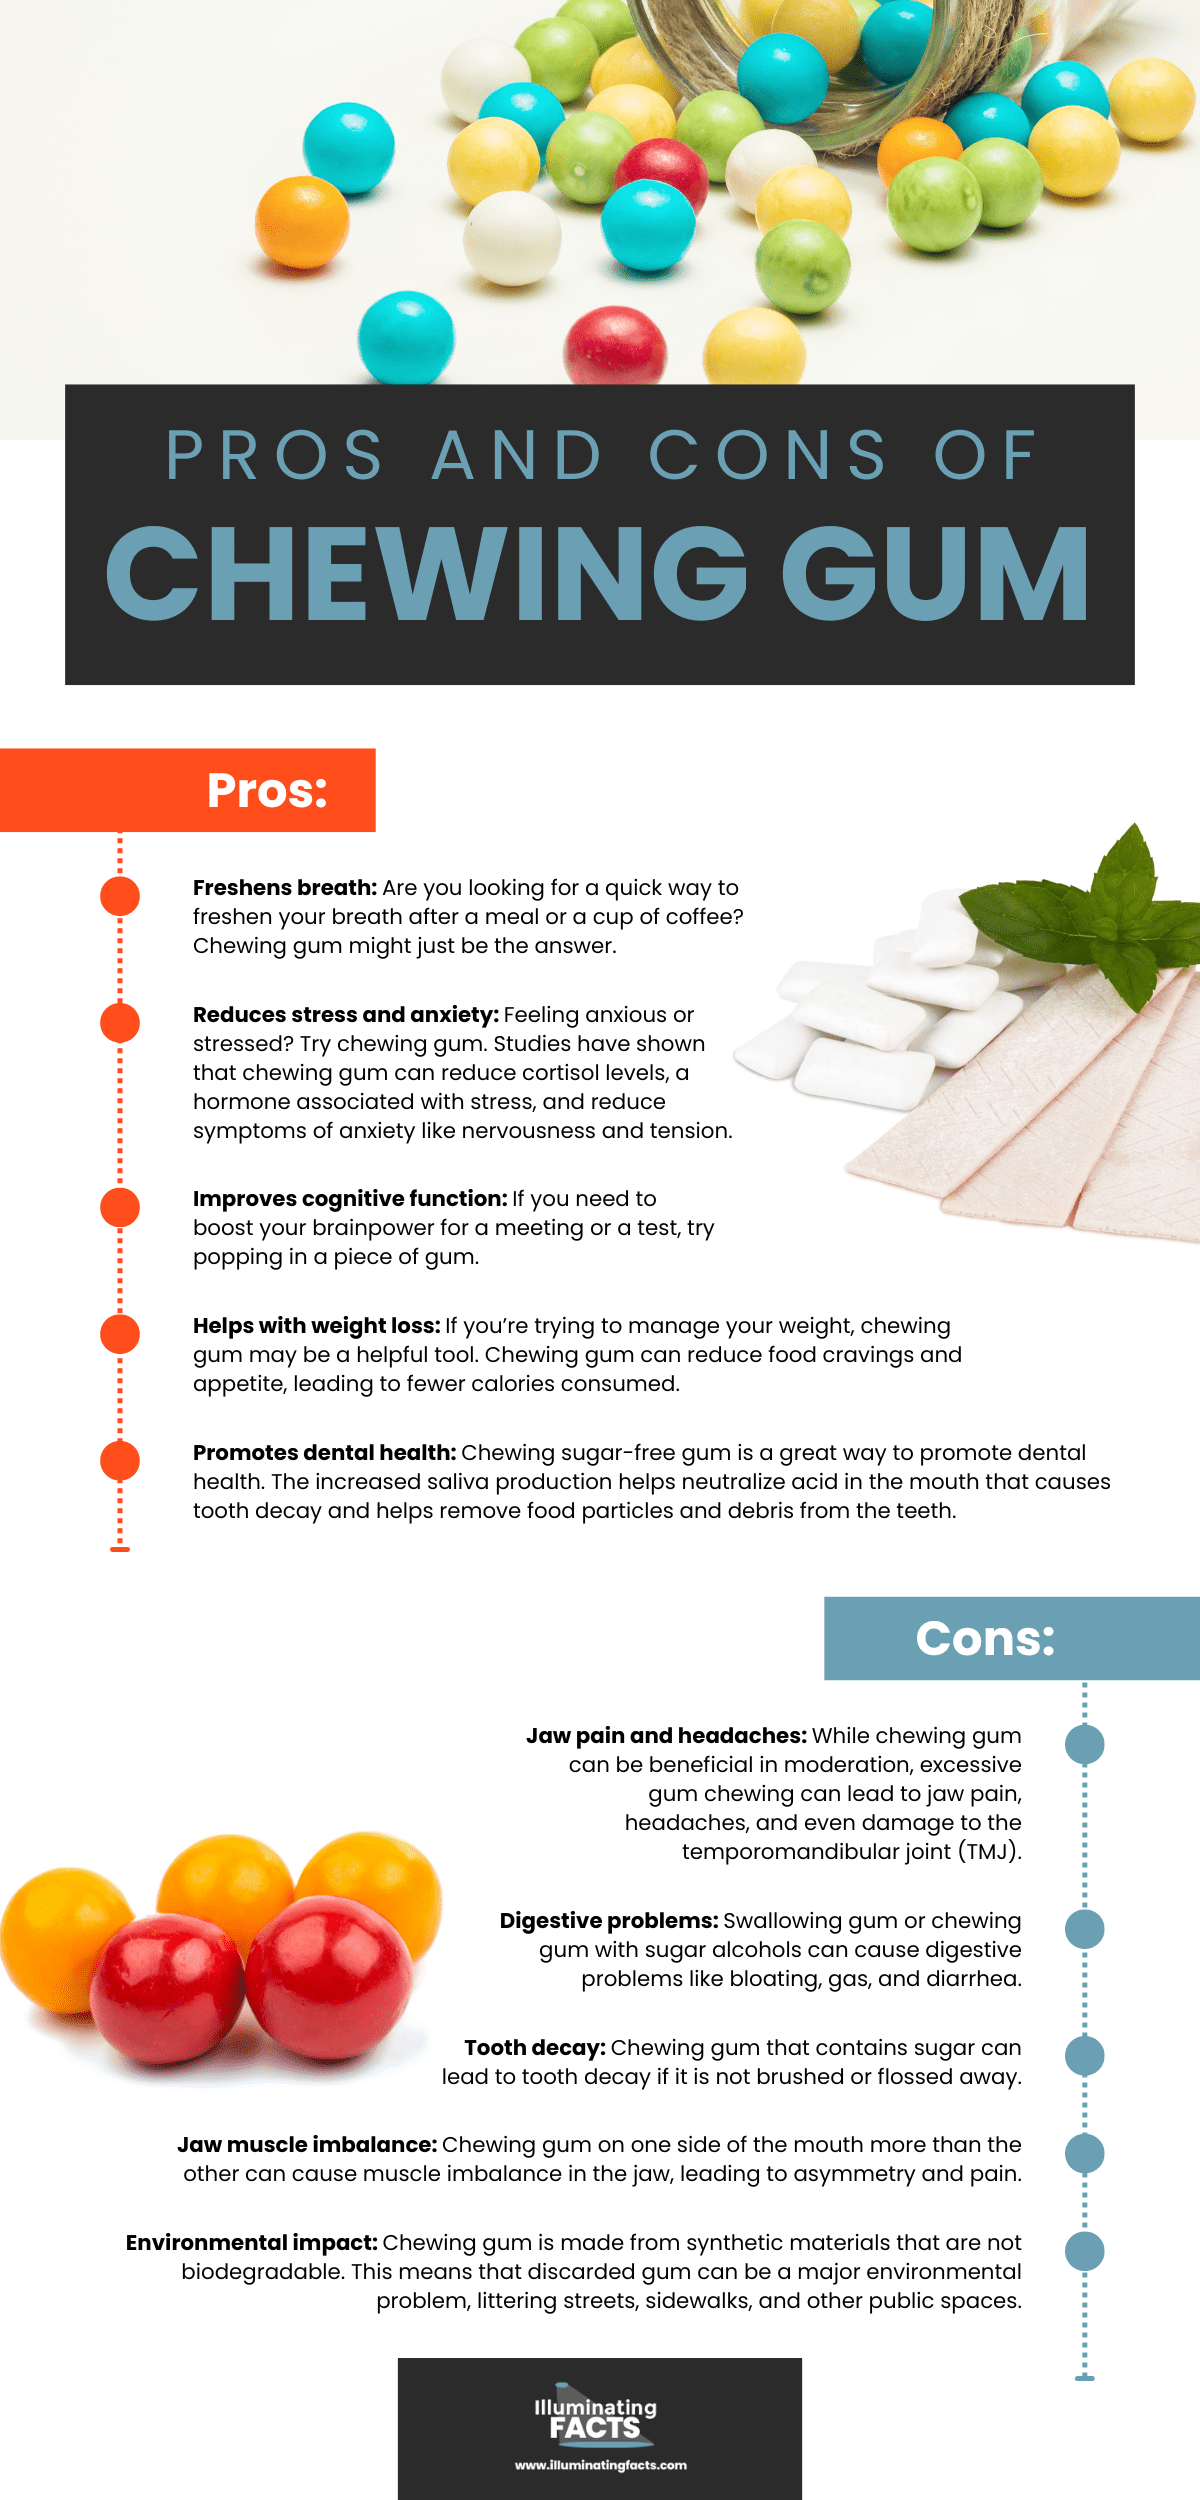 Pros and cons of chewing gum